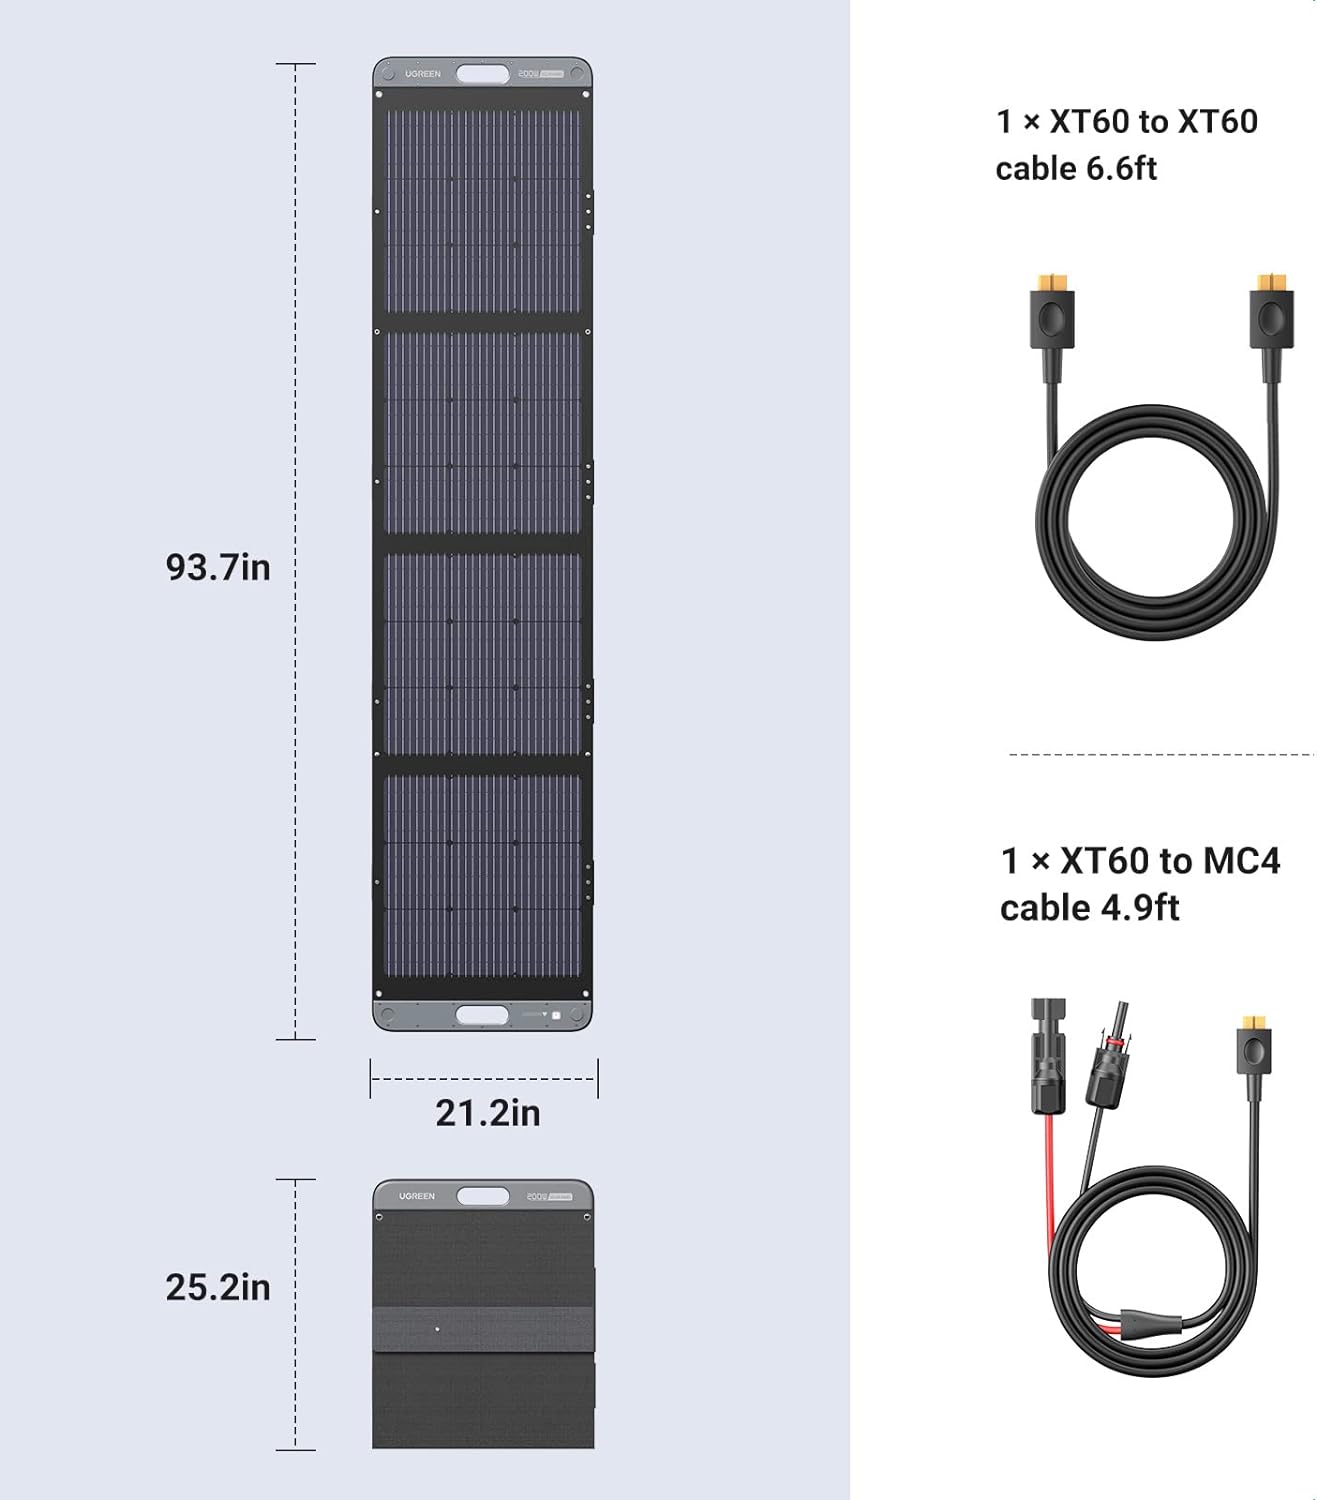 UGREEN 200W Portable Solar Panel for PowerRoam Power Station - 200 Watt Foldable Solar Panel Charger with Adjustable Kickstand for RV, Camping, Outdoors, Blackouts, and More - UGREEN 200W Portable Solar Panel Review